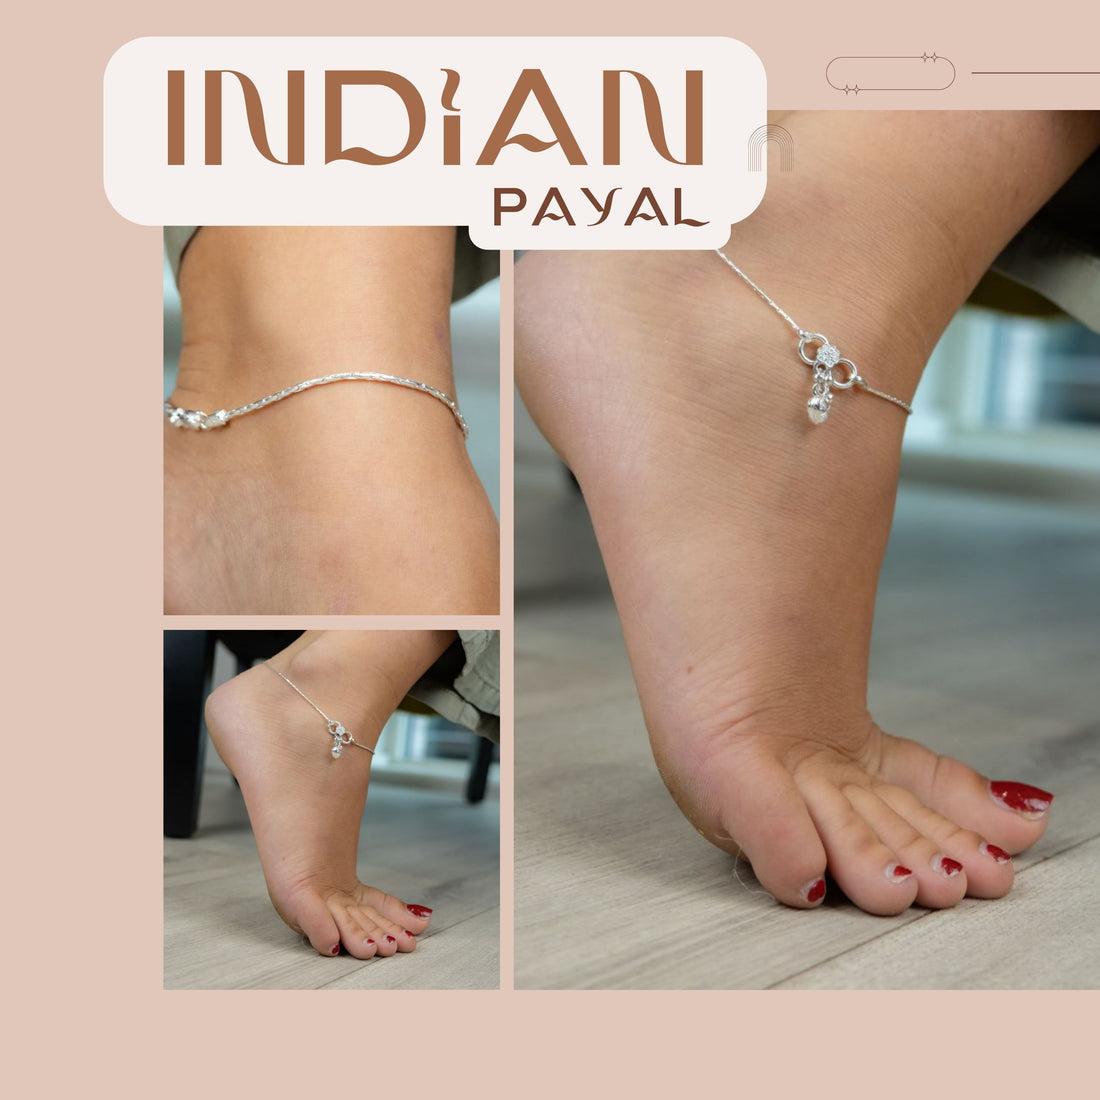 Trending Indian Payal Designs in the UK